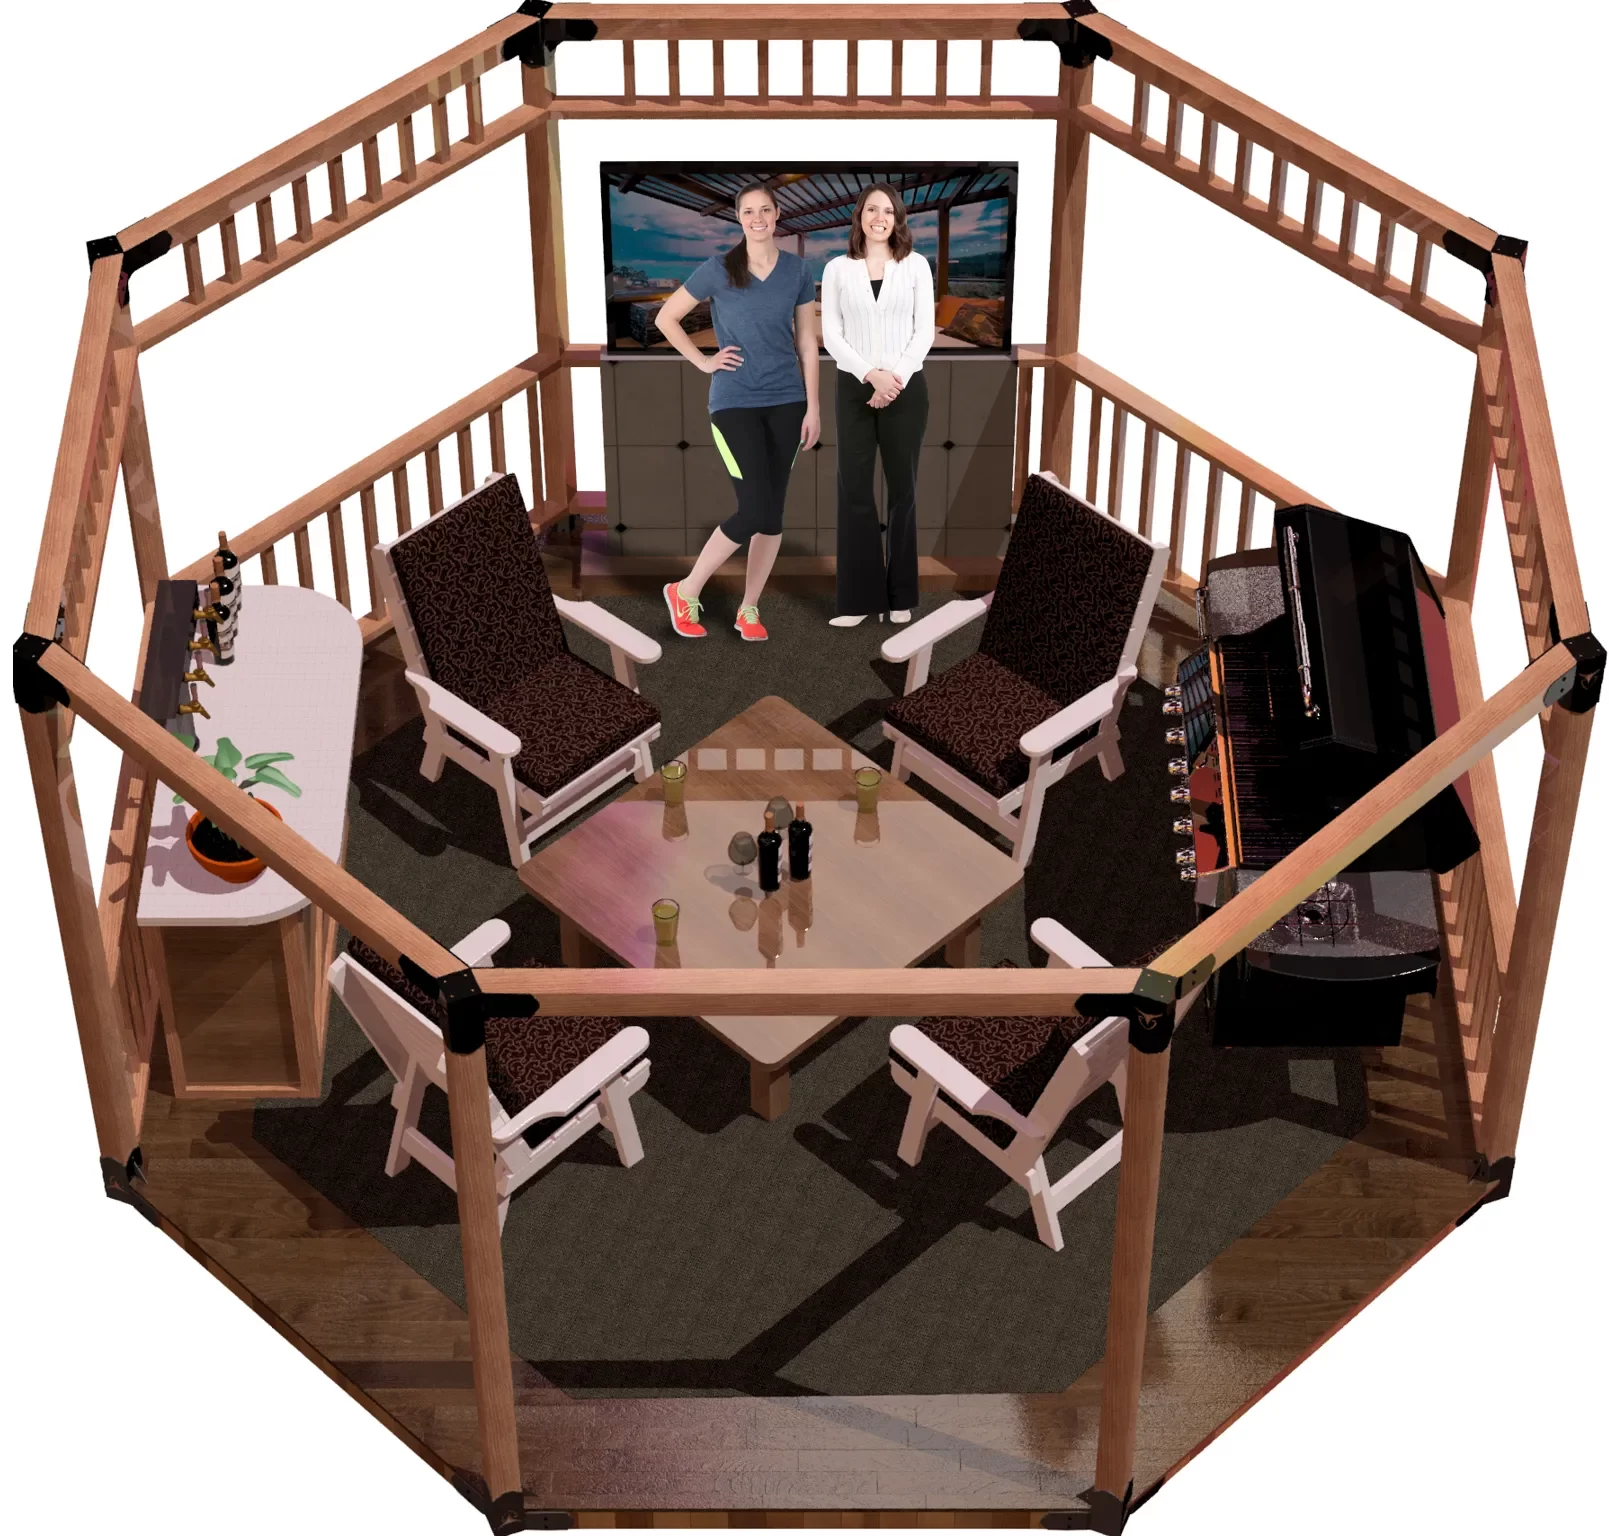 view of a DIY 4x4 floating deck, open top octagon pergola. A bar with beer taps & wine bottles, barbecuer, LED TV, and casual furniture inside and two girls standing and smiling inside it.